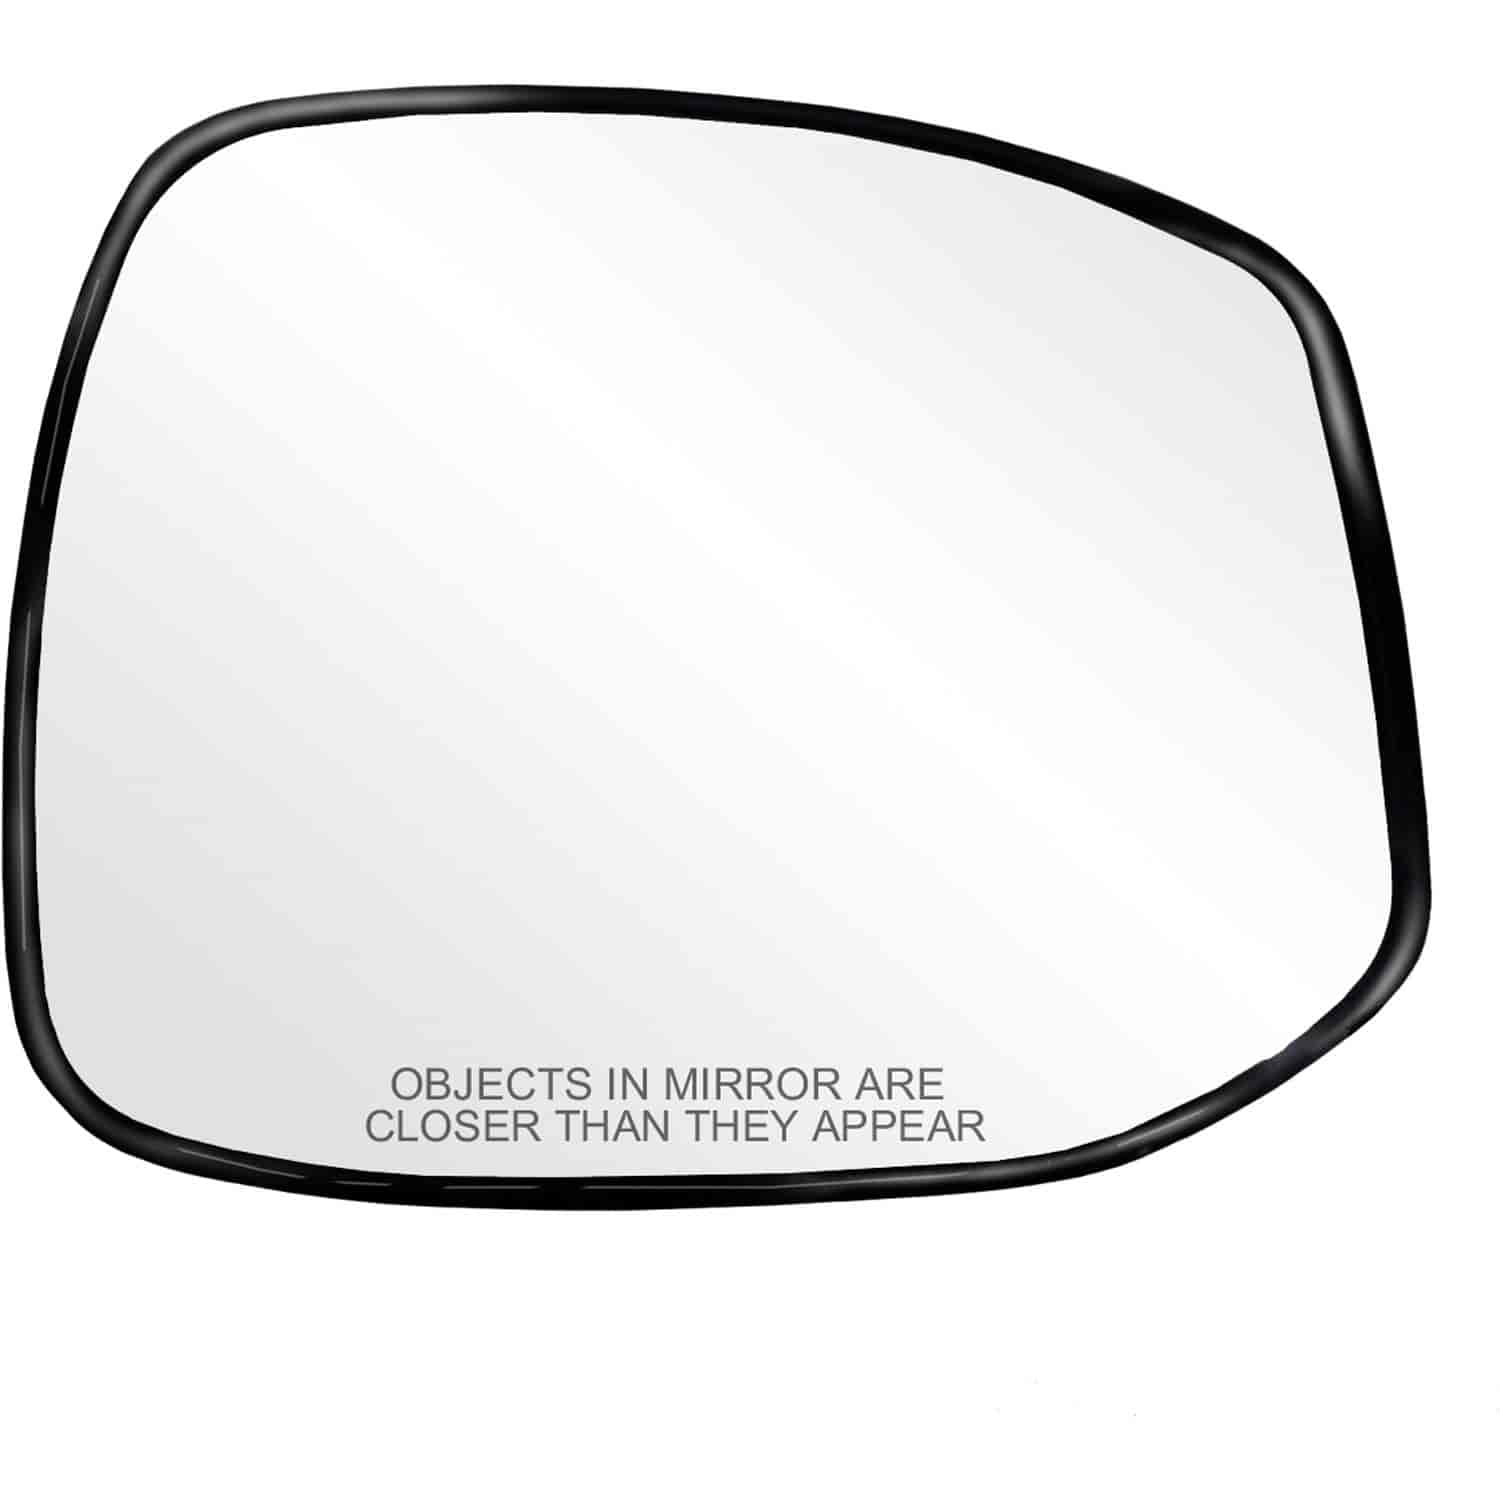 Replacement Glass Assembly for 12-14 Civic replace your cracked or broken passenger side mirror glas